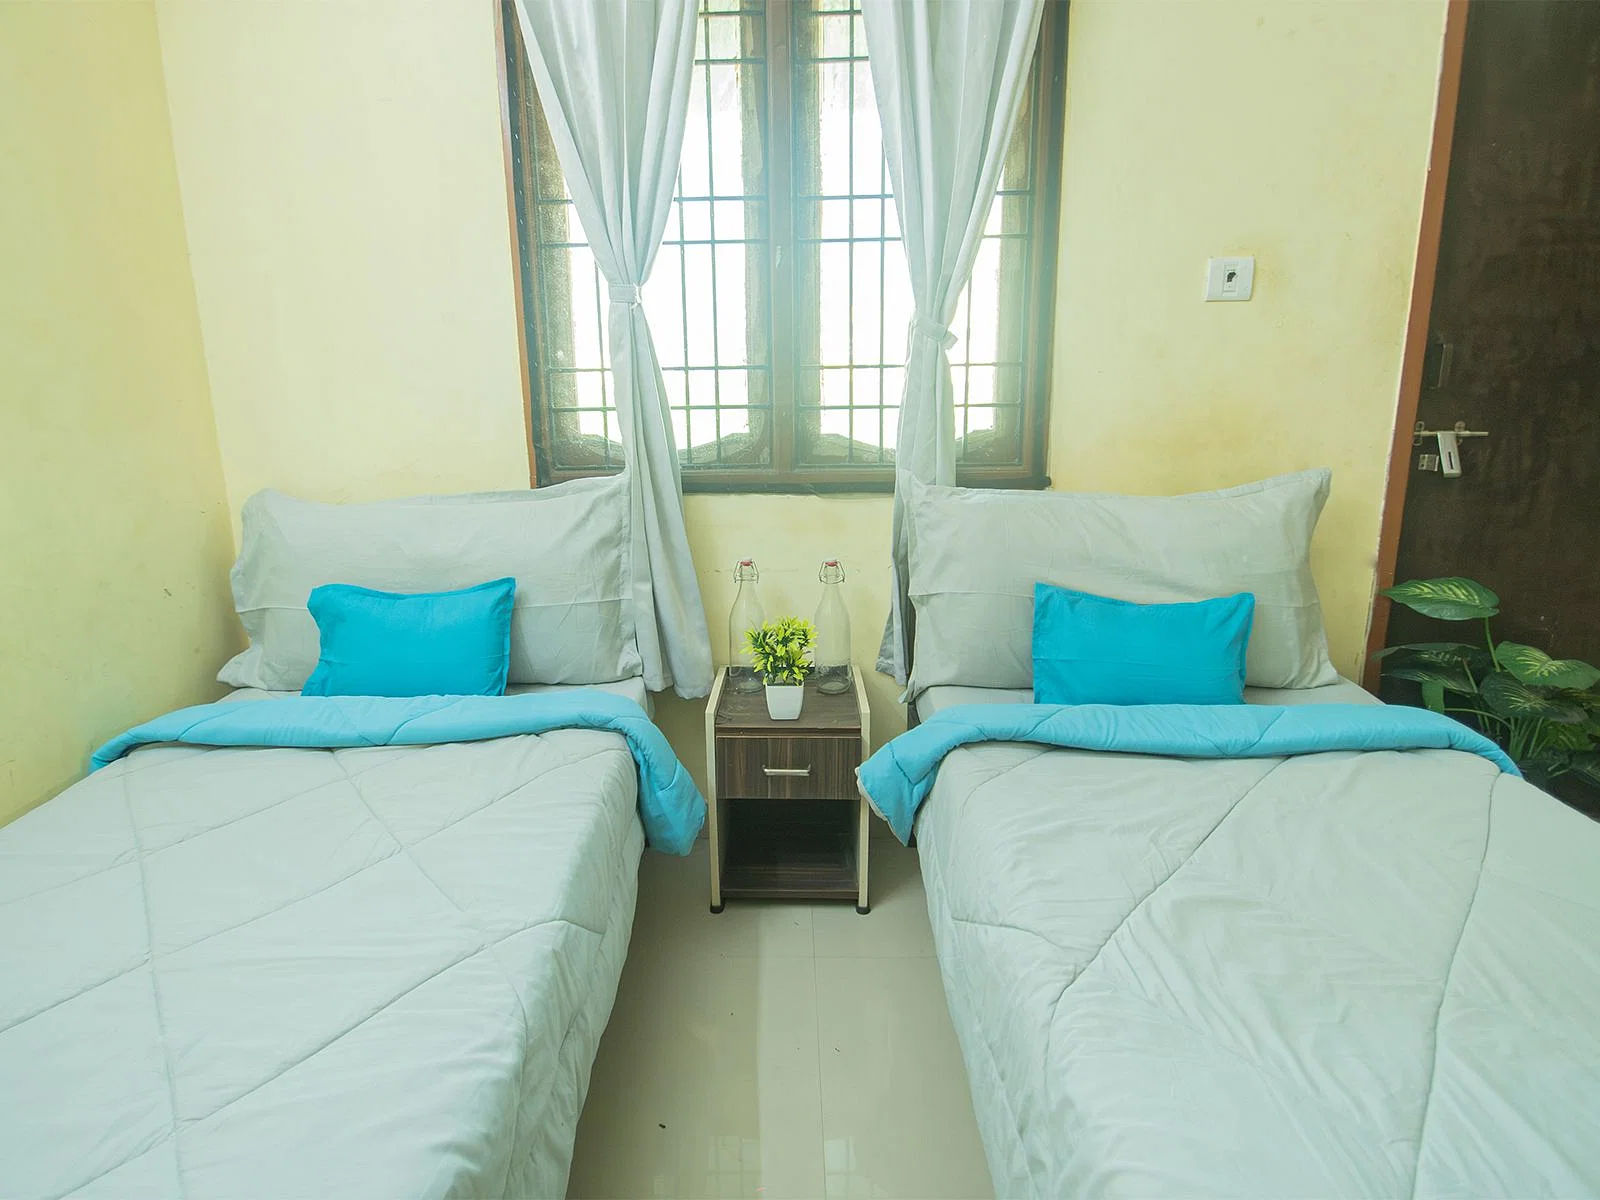 safe and affordable hostels for men students with 24/7 security and CCTV surveillance-Zolo Quintain